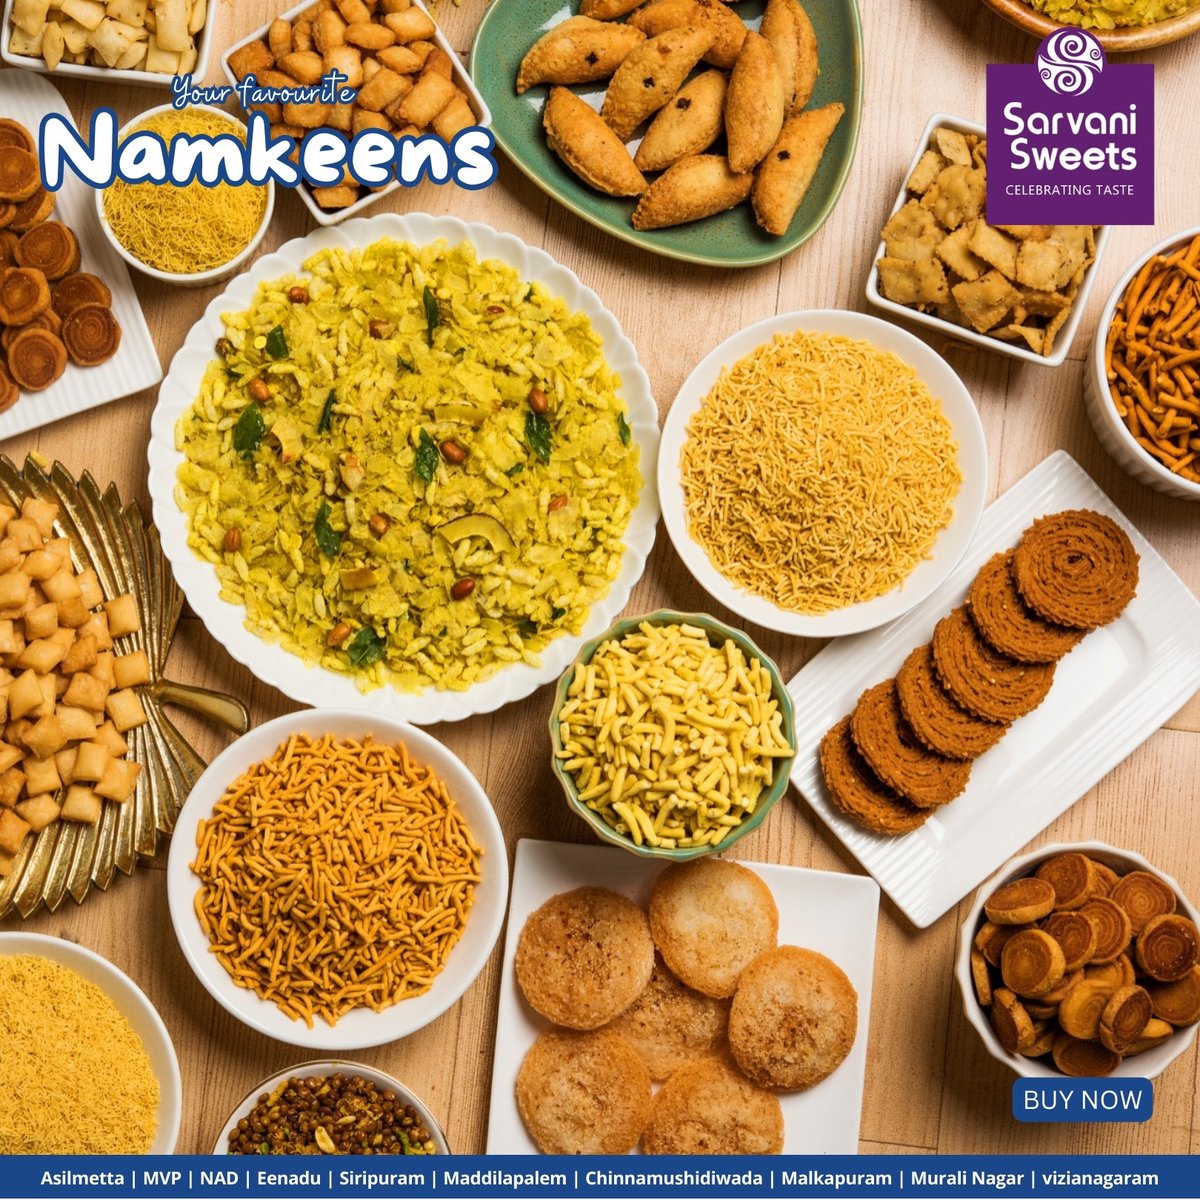 Namkeens are delightful Indian snacks. These crunchy, flavorful treats come in a dizzying array of varieties, textures, and tastes, offering something to please every palate.

@Sarvani_Sweets

#namkeens #snacks #sweets #indiansweets #yummy #traditionalsweets #sarvanisweets #tasty